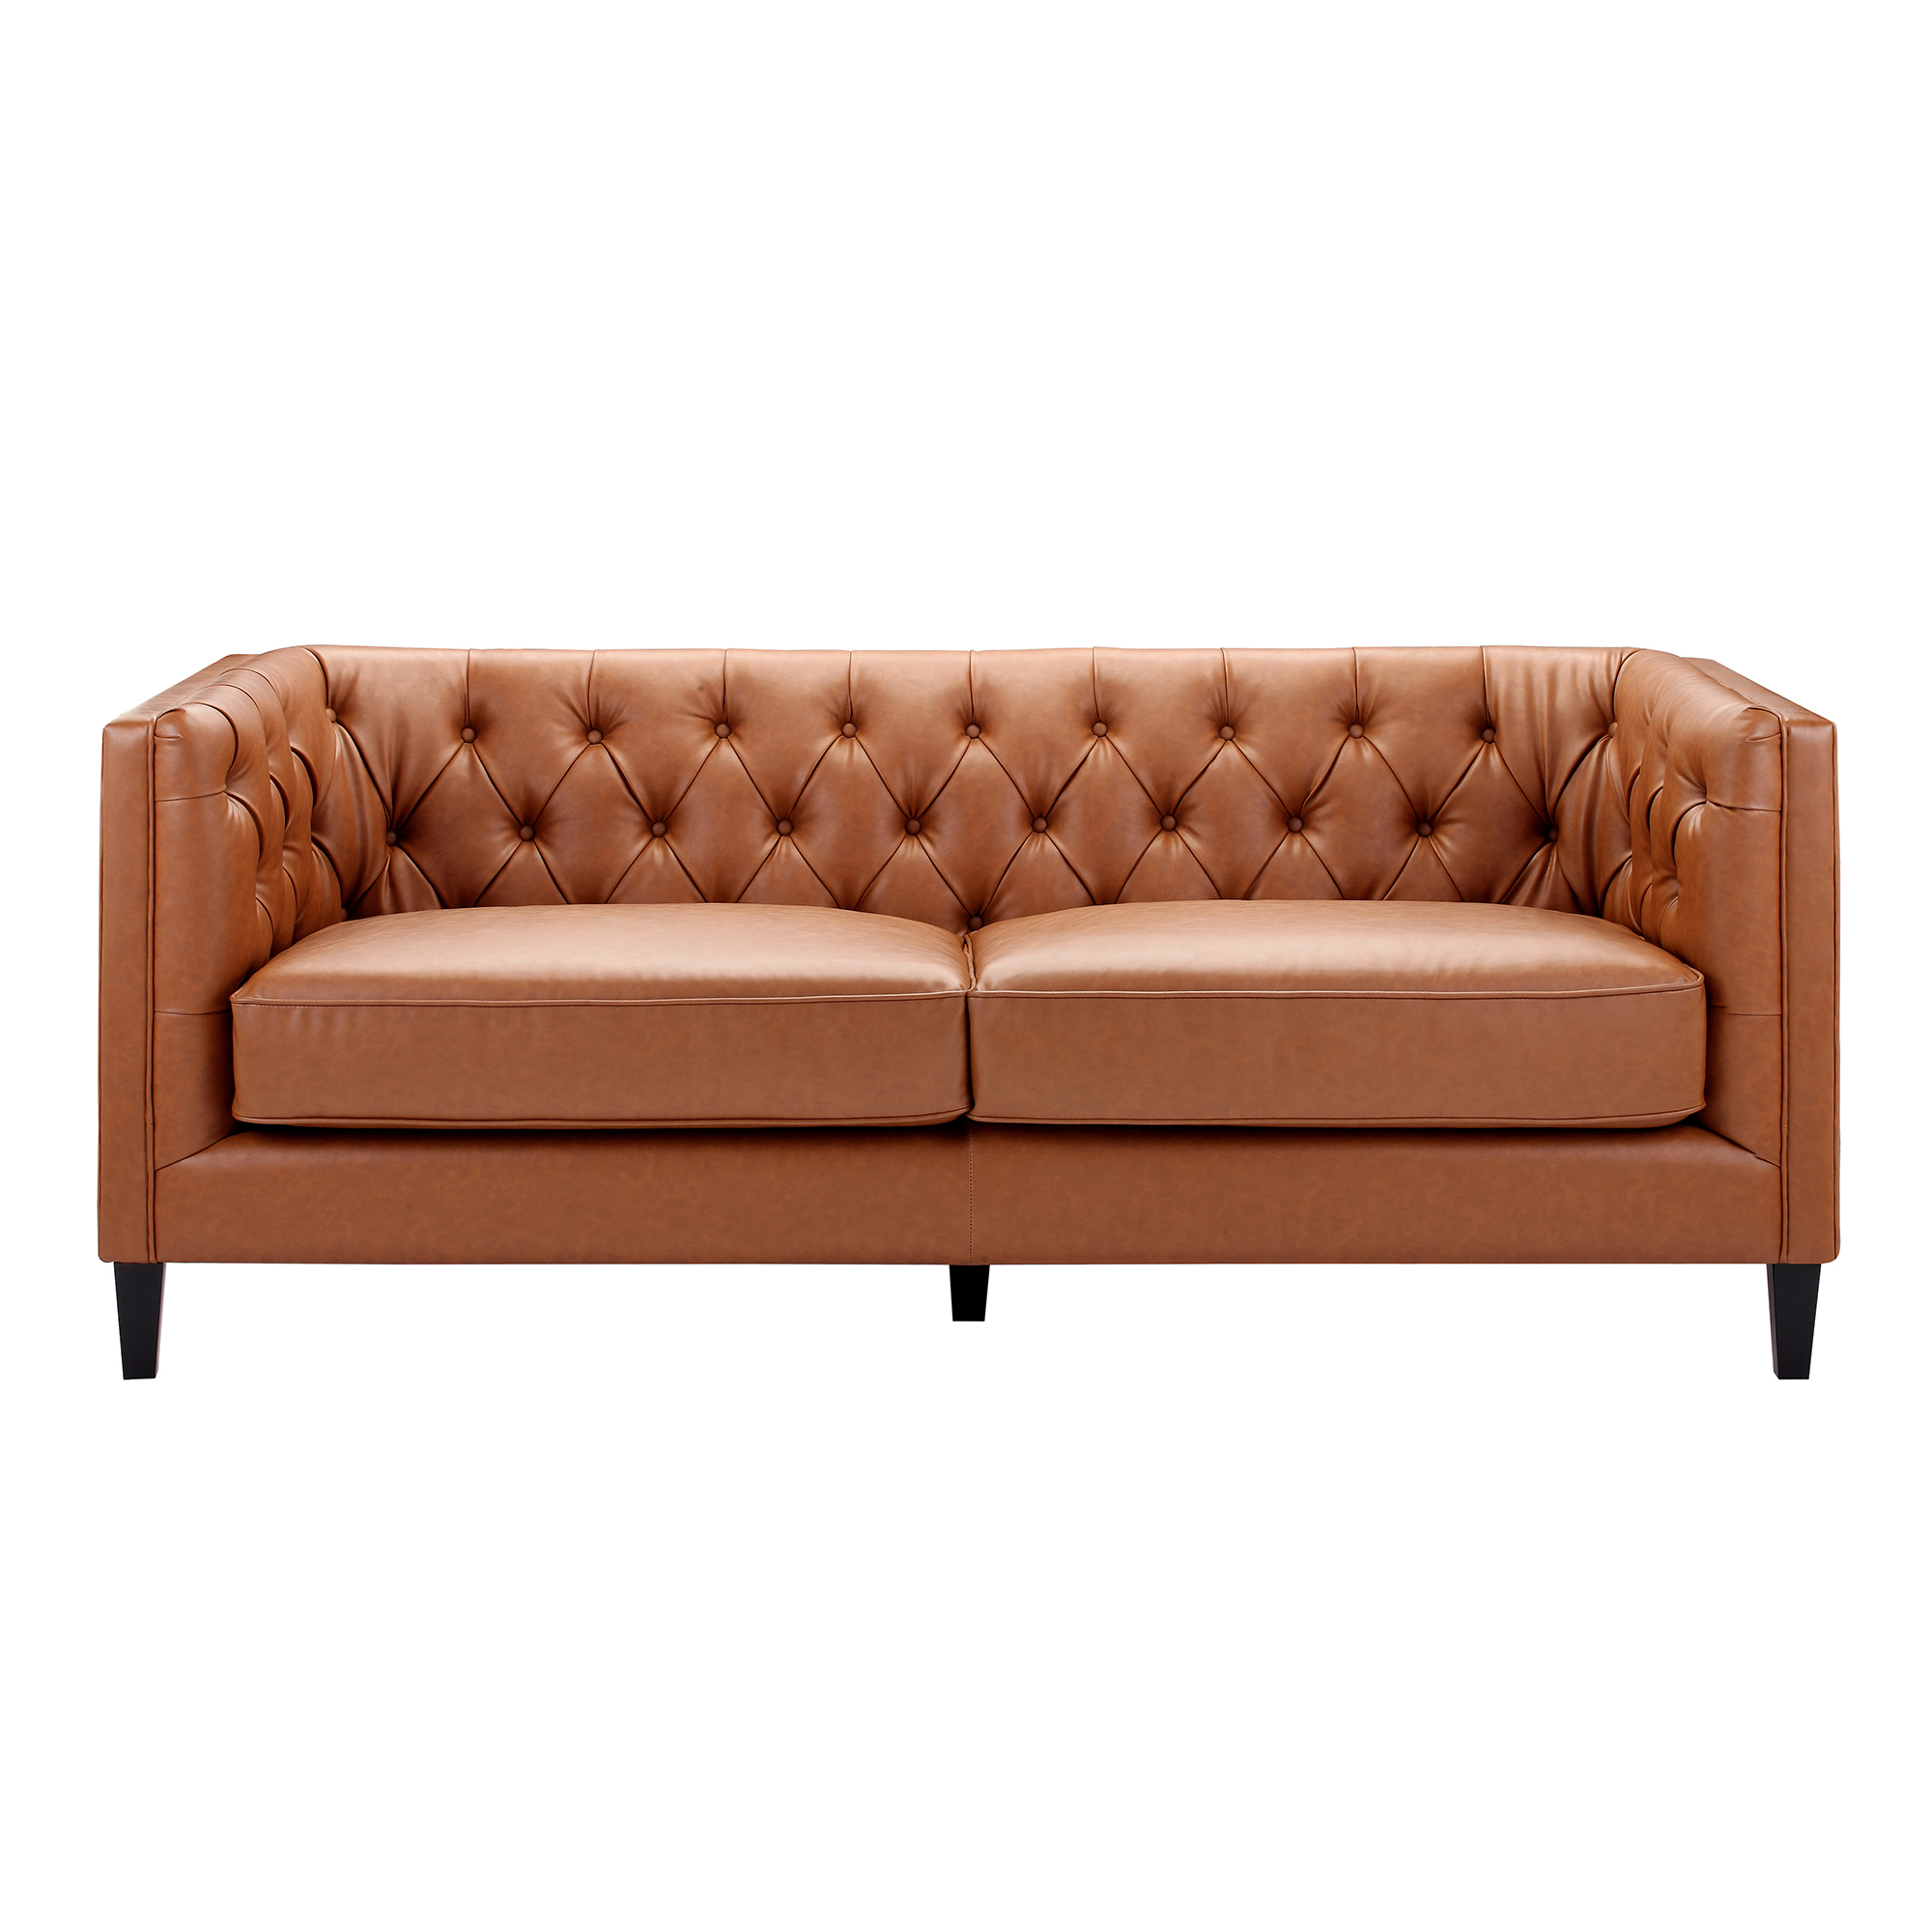 synthetic leather sofa reviews